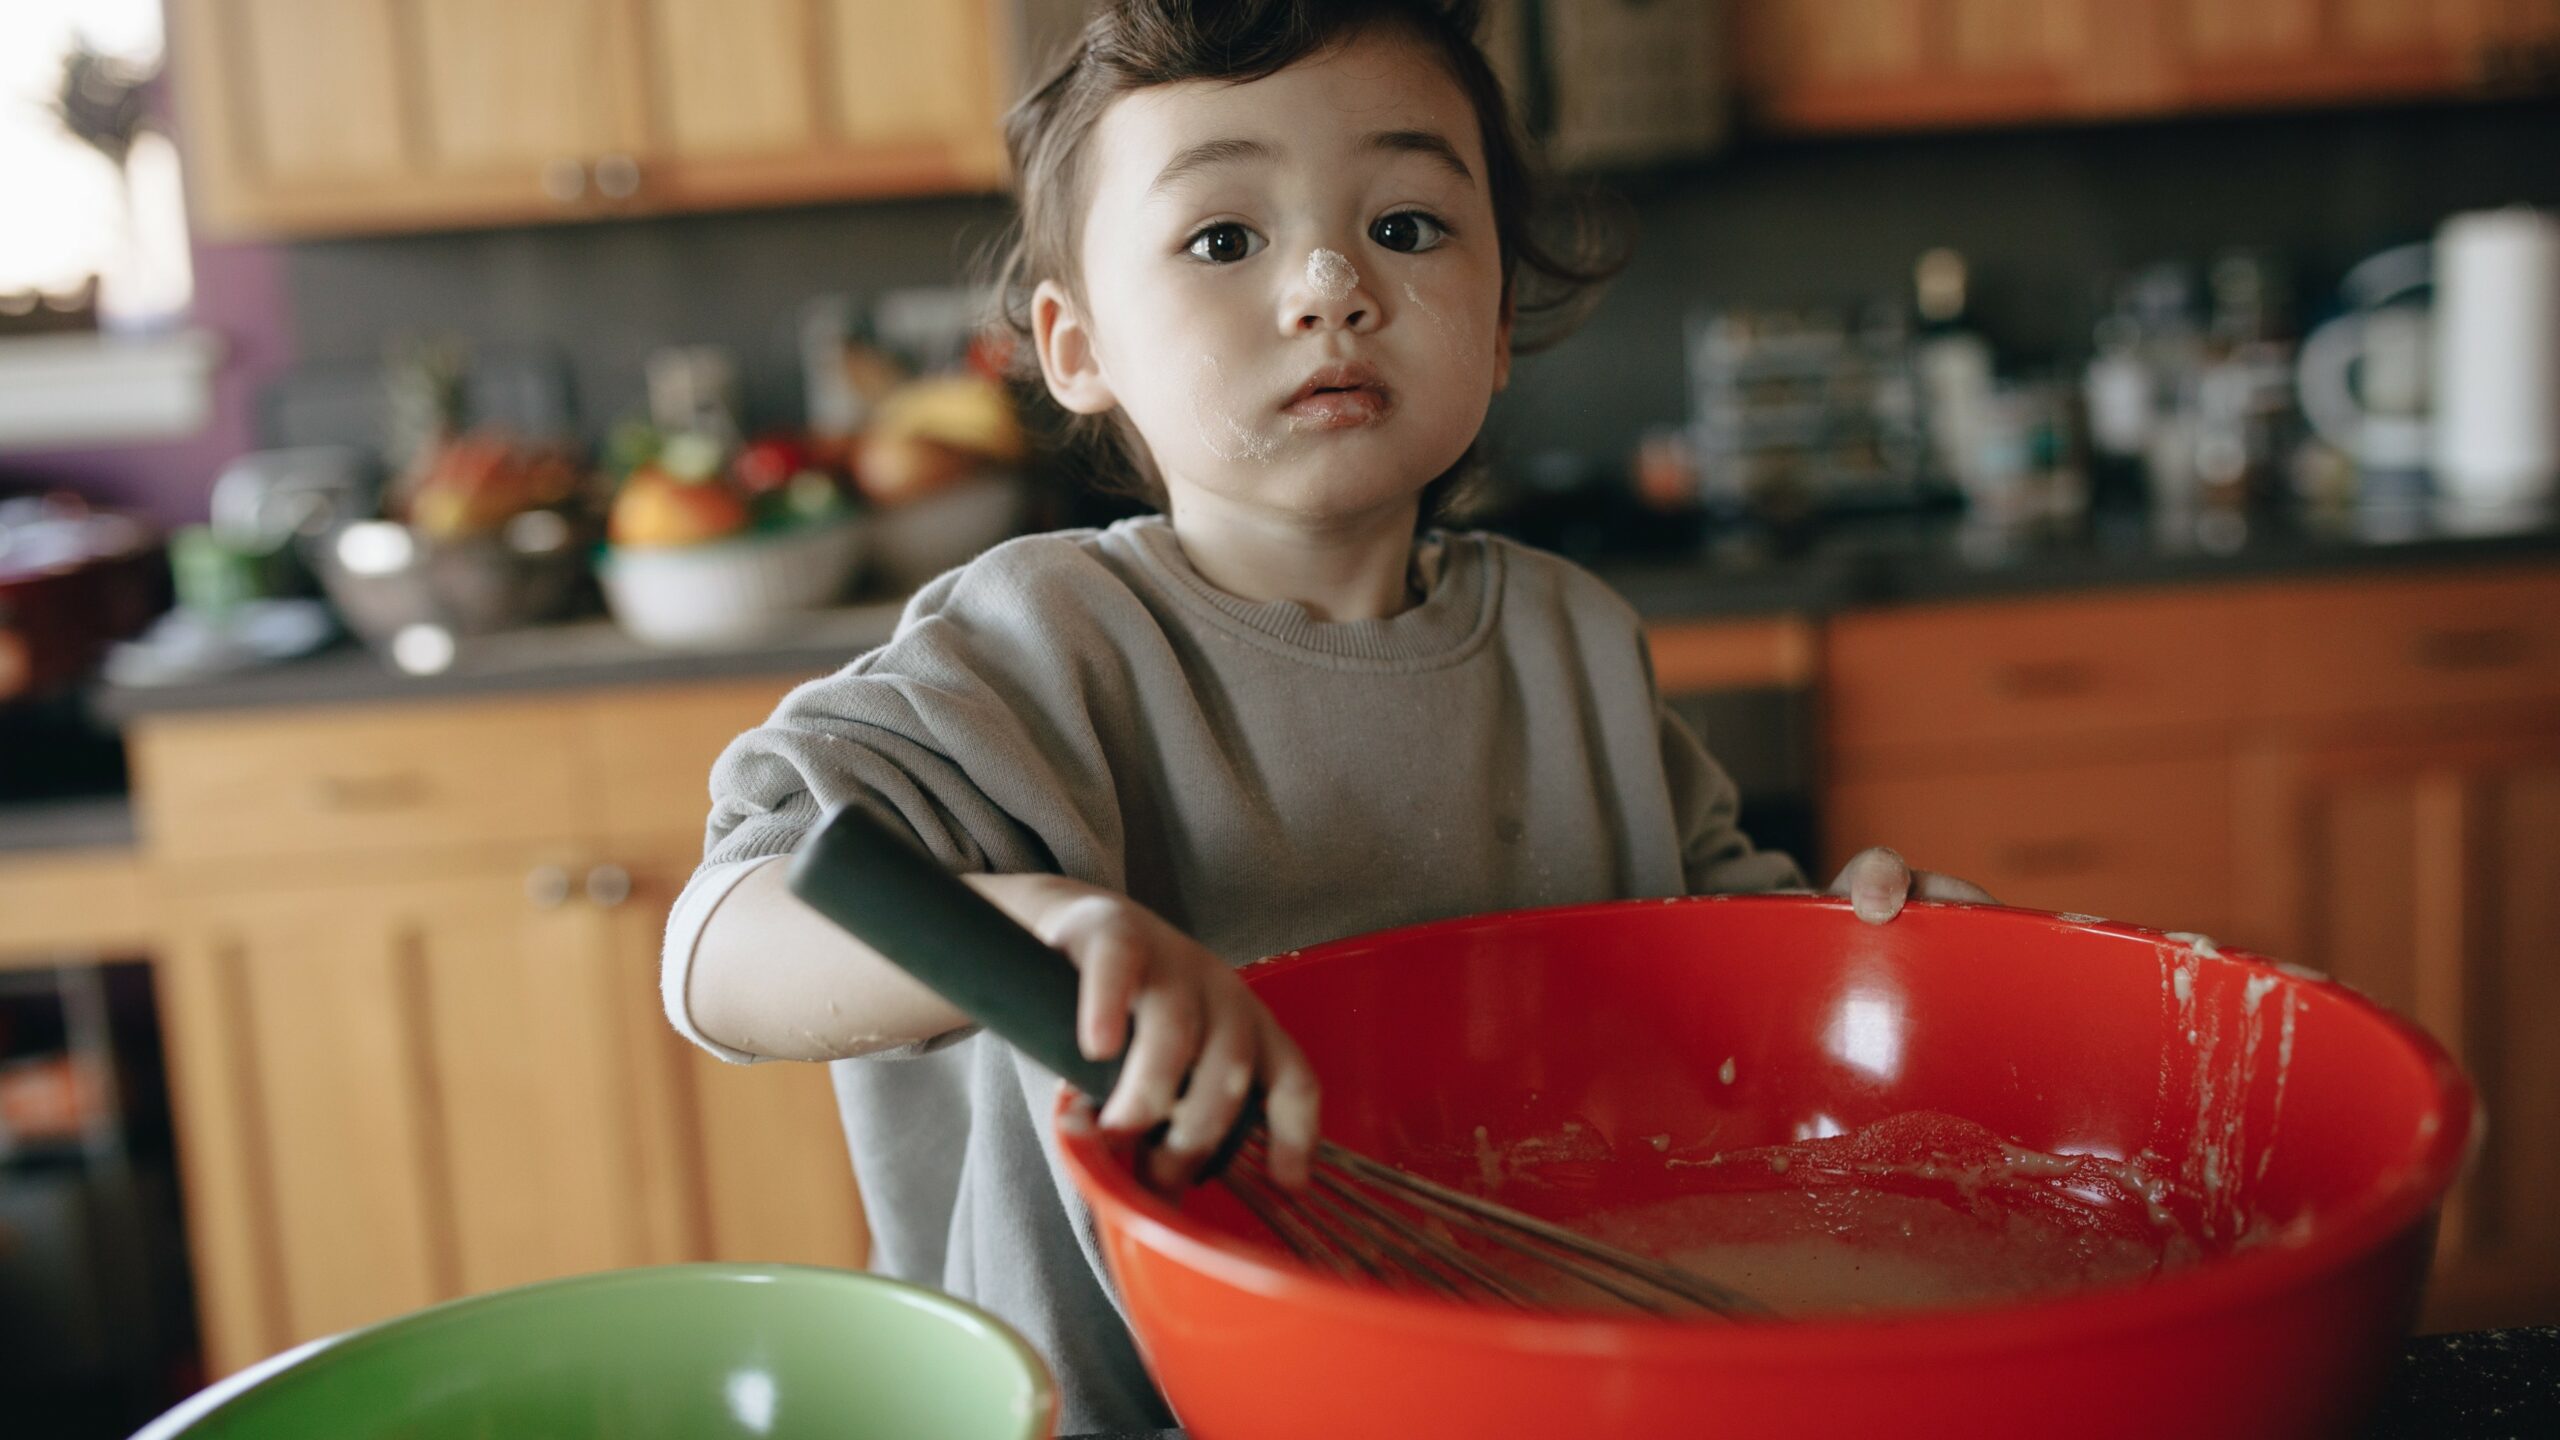 Young kid stirring batter and helping bake.